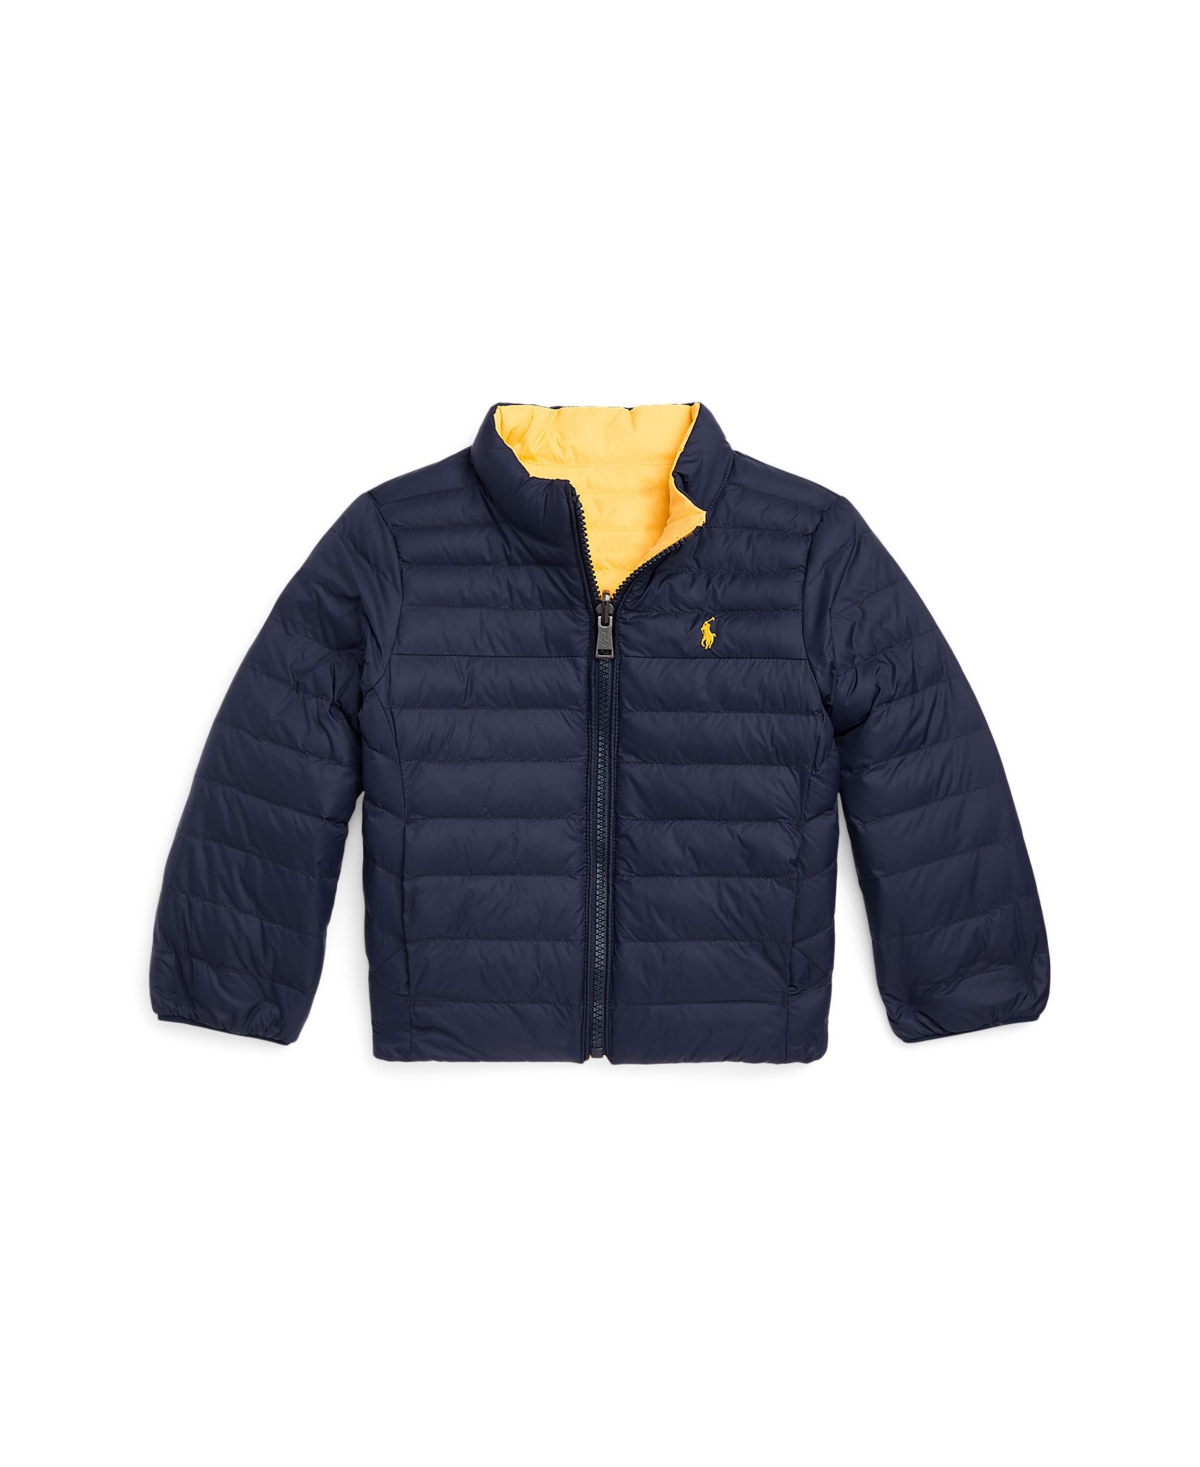 Polo Ralph Lauren Kids' Toddler And Little Unisex P-layer 2 Reversible Jacket In Newport Navy,yellow Finish